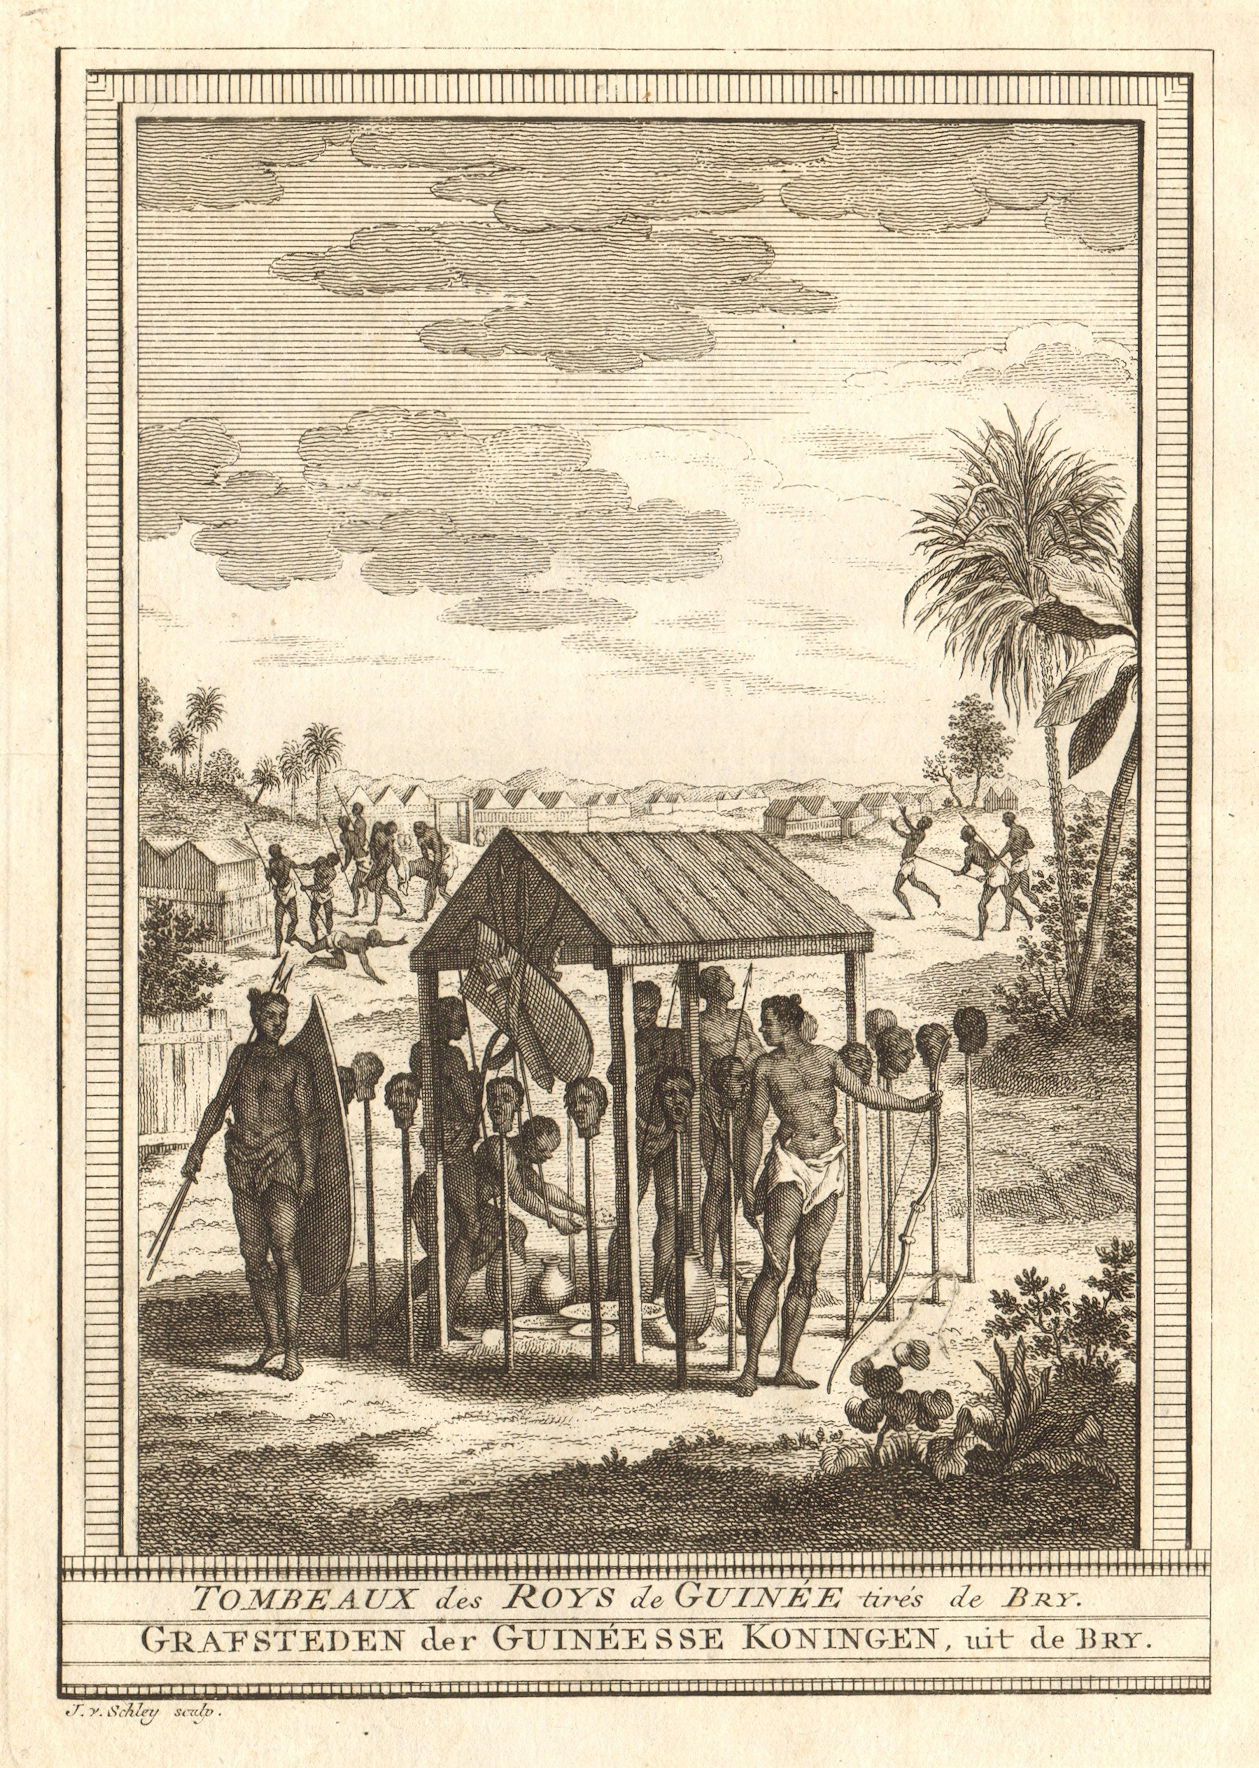 West Africa. Tombs of the Kings of Guinea, taken from Bry. SCHLEY 1748 print